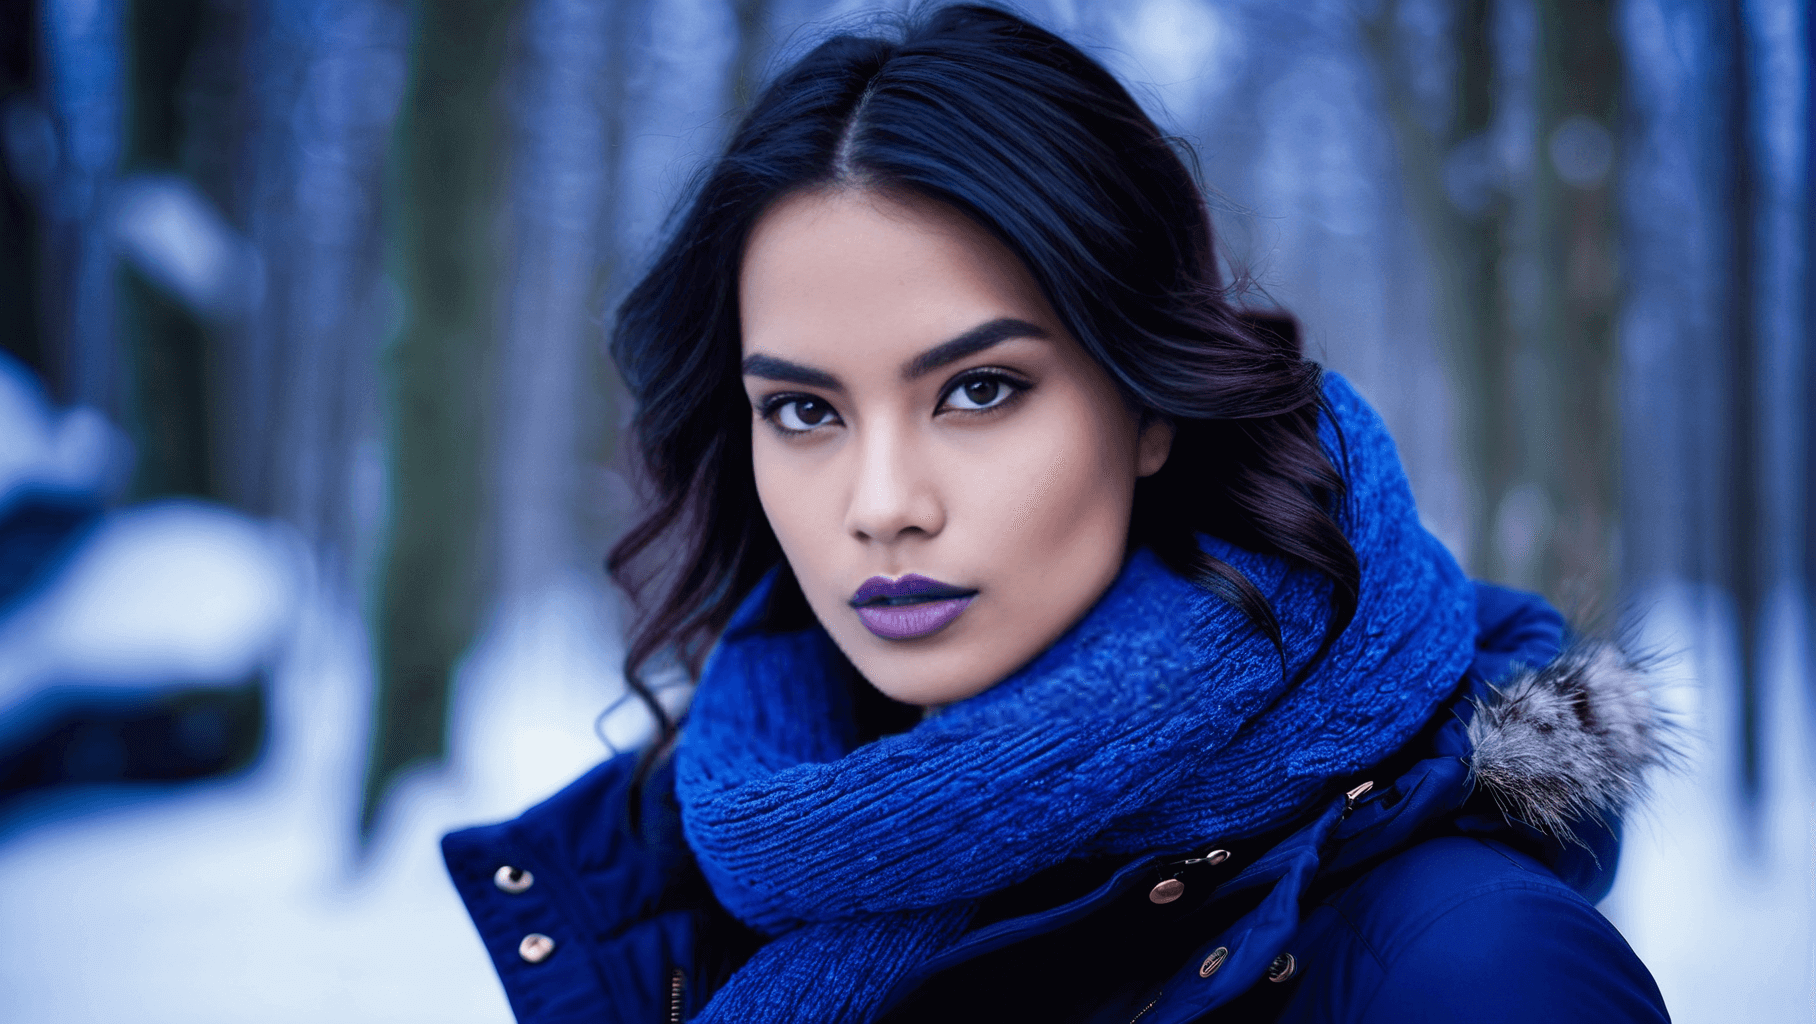 Woman in a navy blue winter coat and textured blue scarf with a snowy forest in the background.